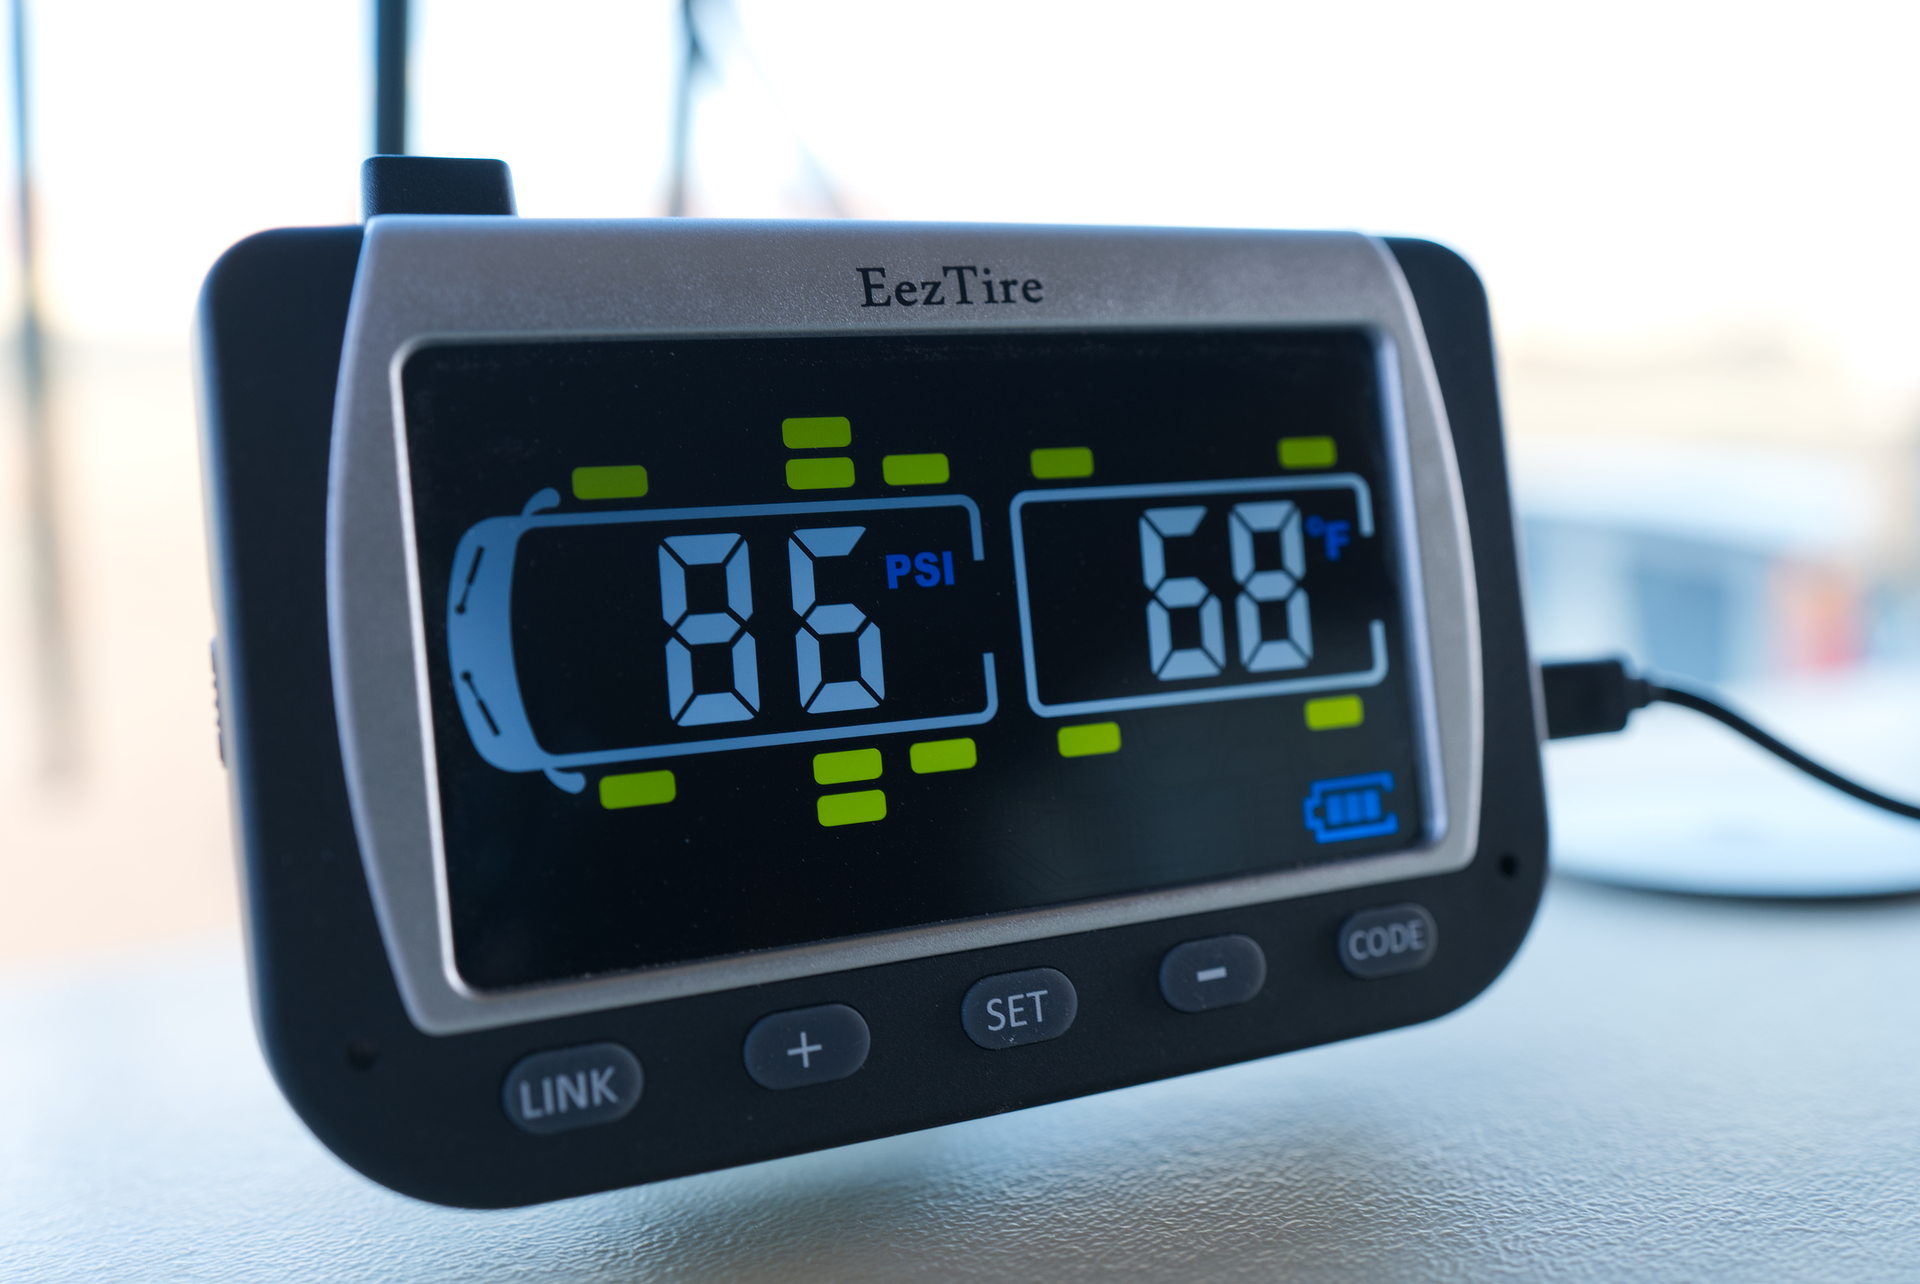 The easy-to-read color screen on our EEZTire RV TPMS